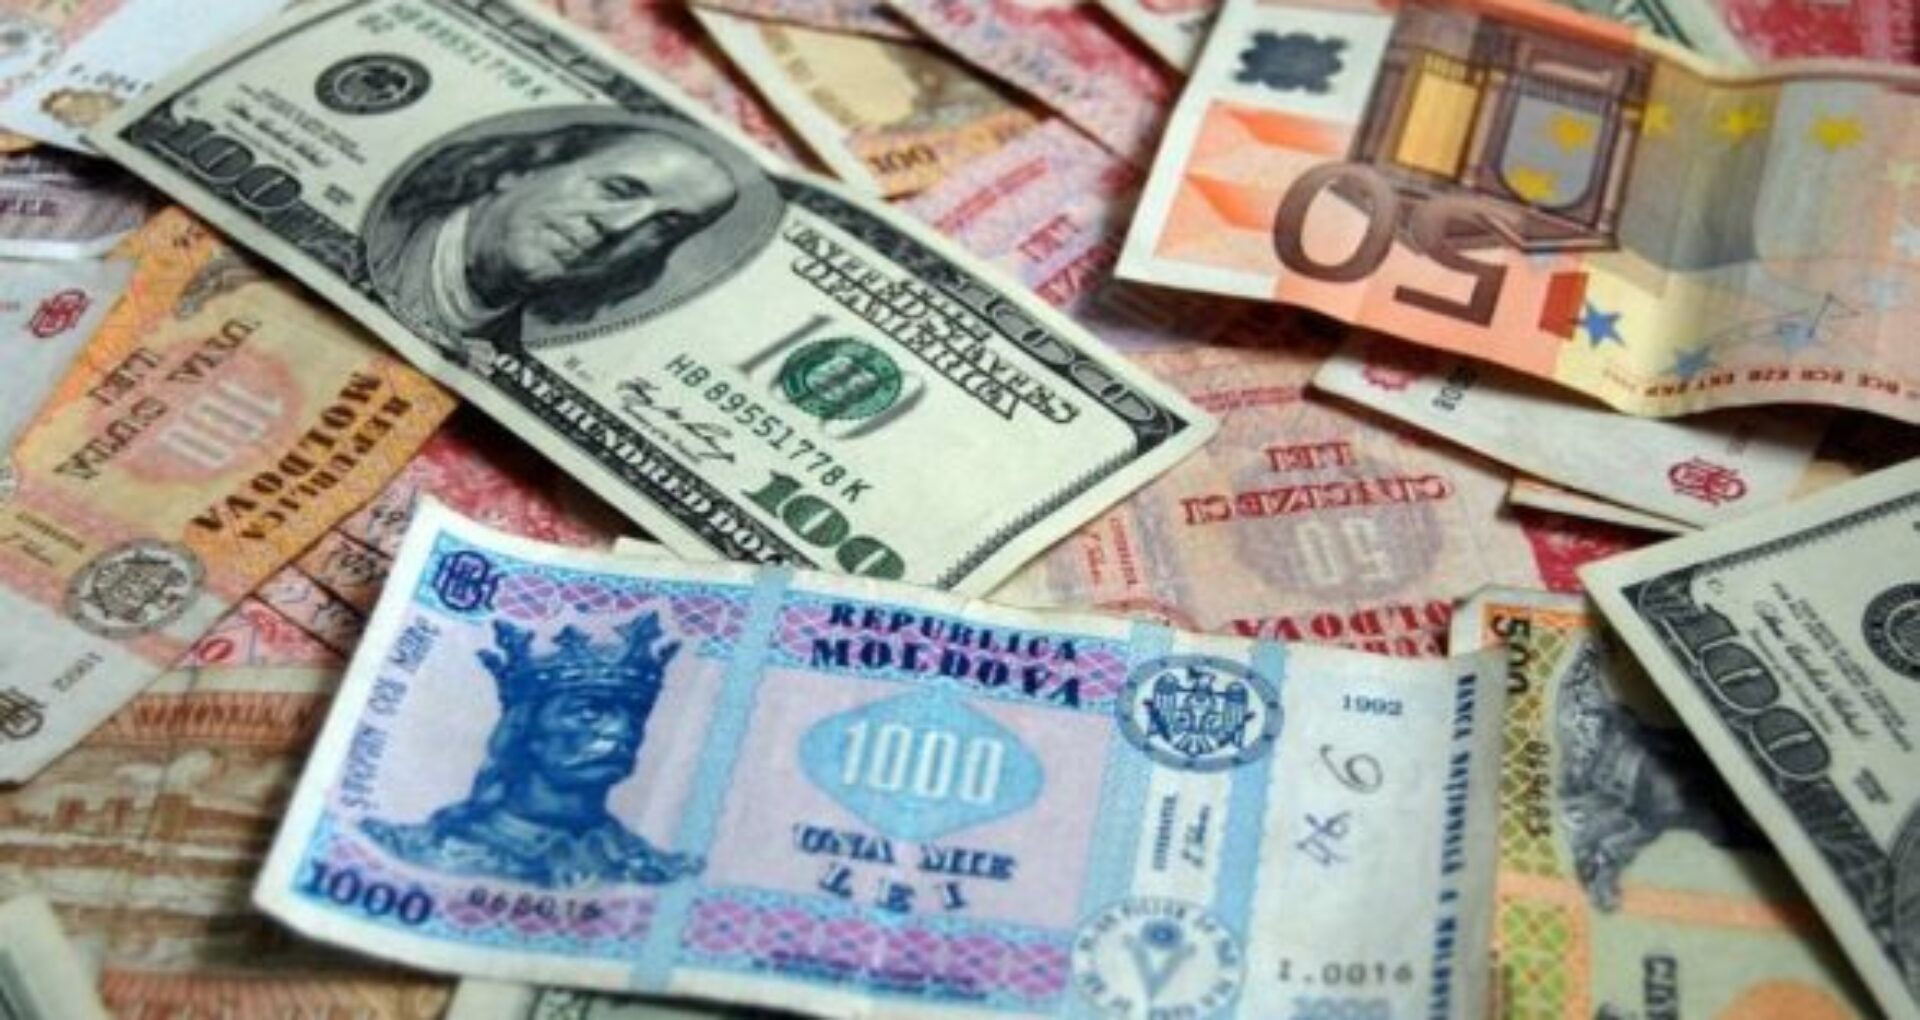 DOC / Moldova Will Pay in 2020 Over €3.4 Million to International Organizations